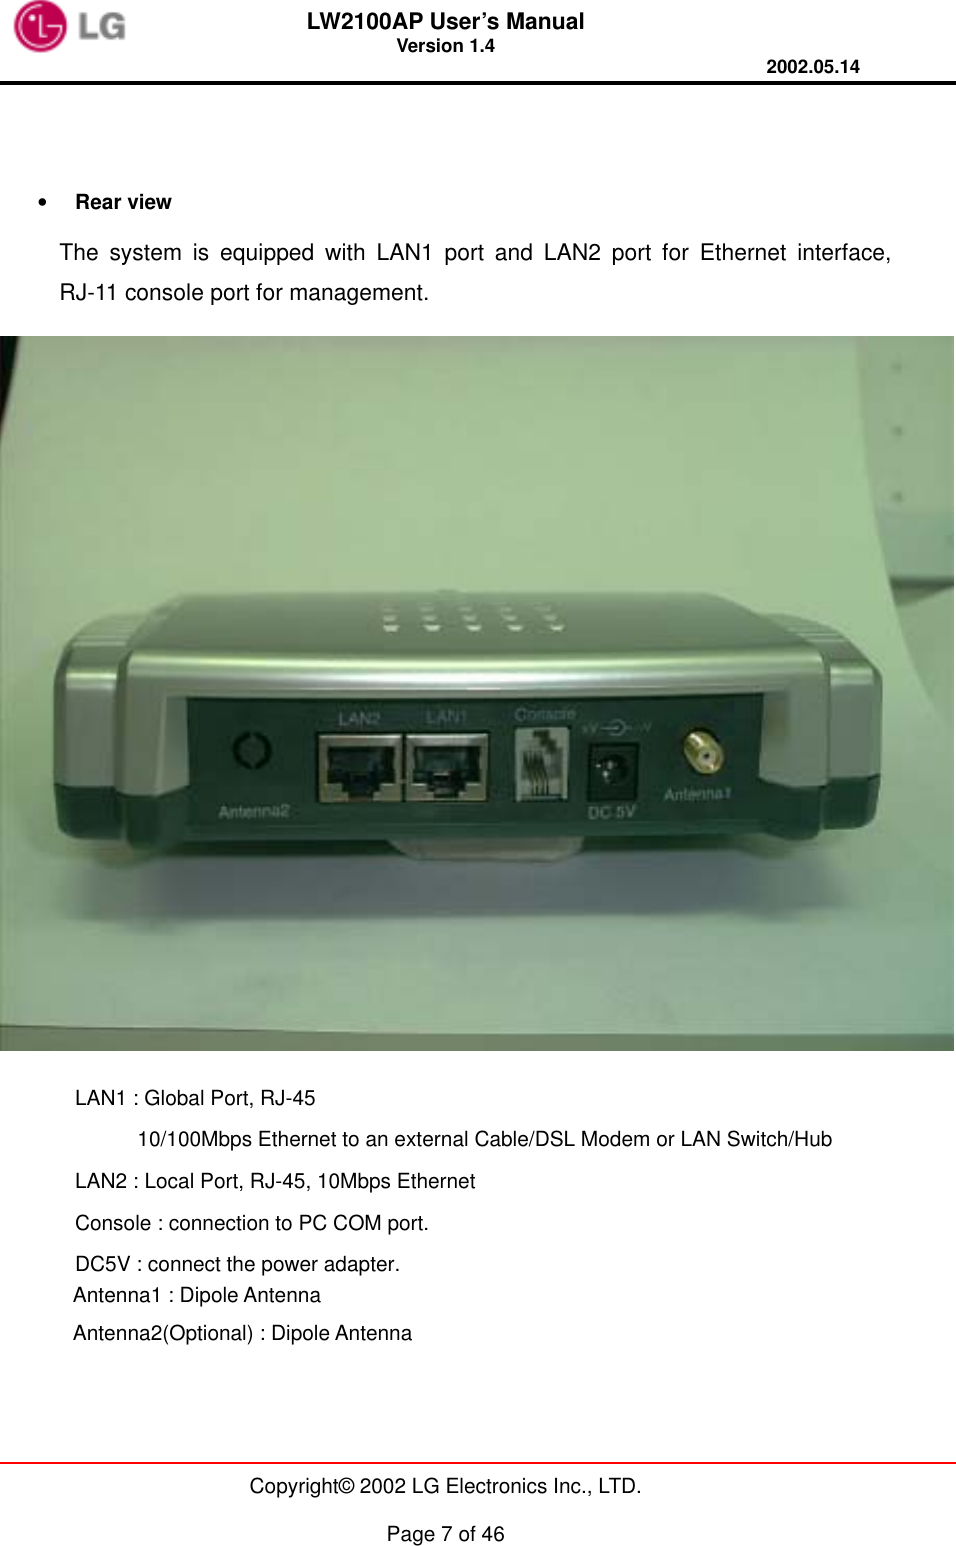 LW2100AP User’s Manual Version 1.4 2002.05.14   Copyright© 2002 LG Electronics Inc., LTD.  Page 7 of 46   •  Rear view     The system is equipped with LAN1 port and LAN2 port for Ethernet interface,  RJ-11 console port for management.  LAN1 : Global Port, RJ-45       10/100Mbps Ethernet to an external Cable/DSL Modem or LAN Switch/Hub LAN2 : Local Port, RJ-45, 10Mbps Ethernet   Console : connection to PC COM port. DC5V : connect the power adapter.        Antenna1 : Dipole Antenna        Antenna2(Optional) : Dipole Antenna  